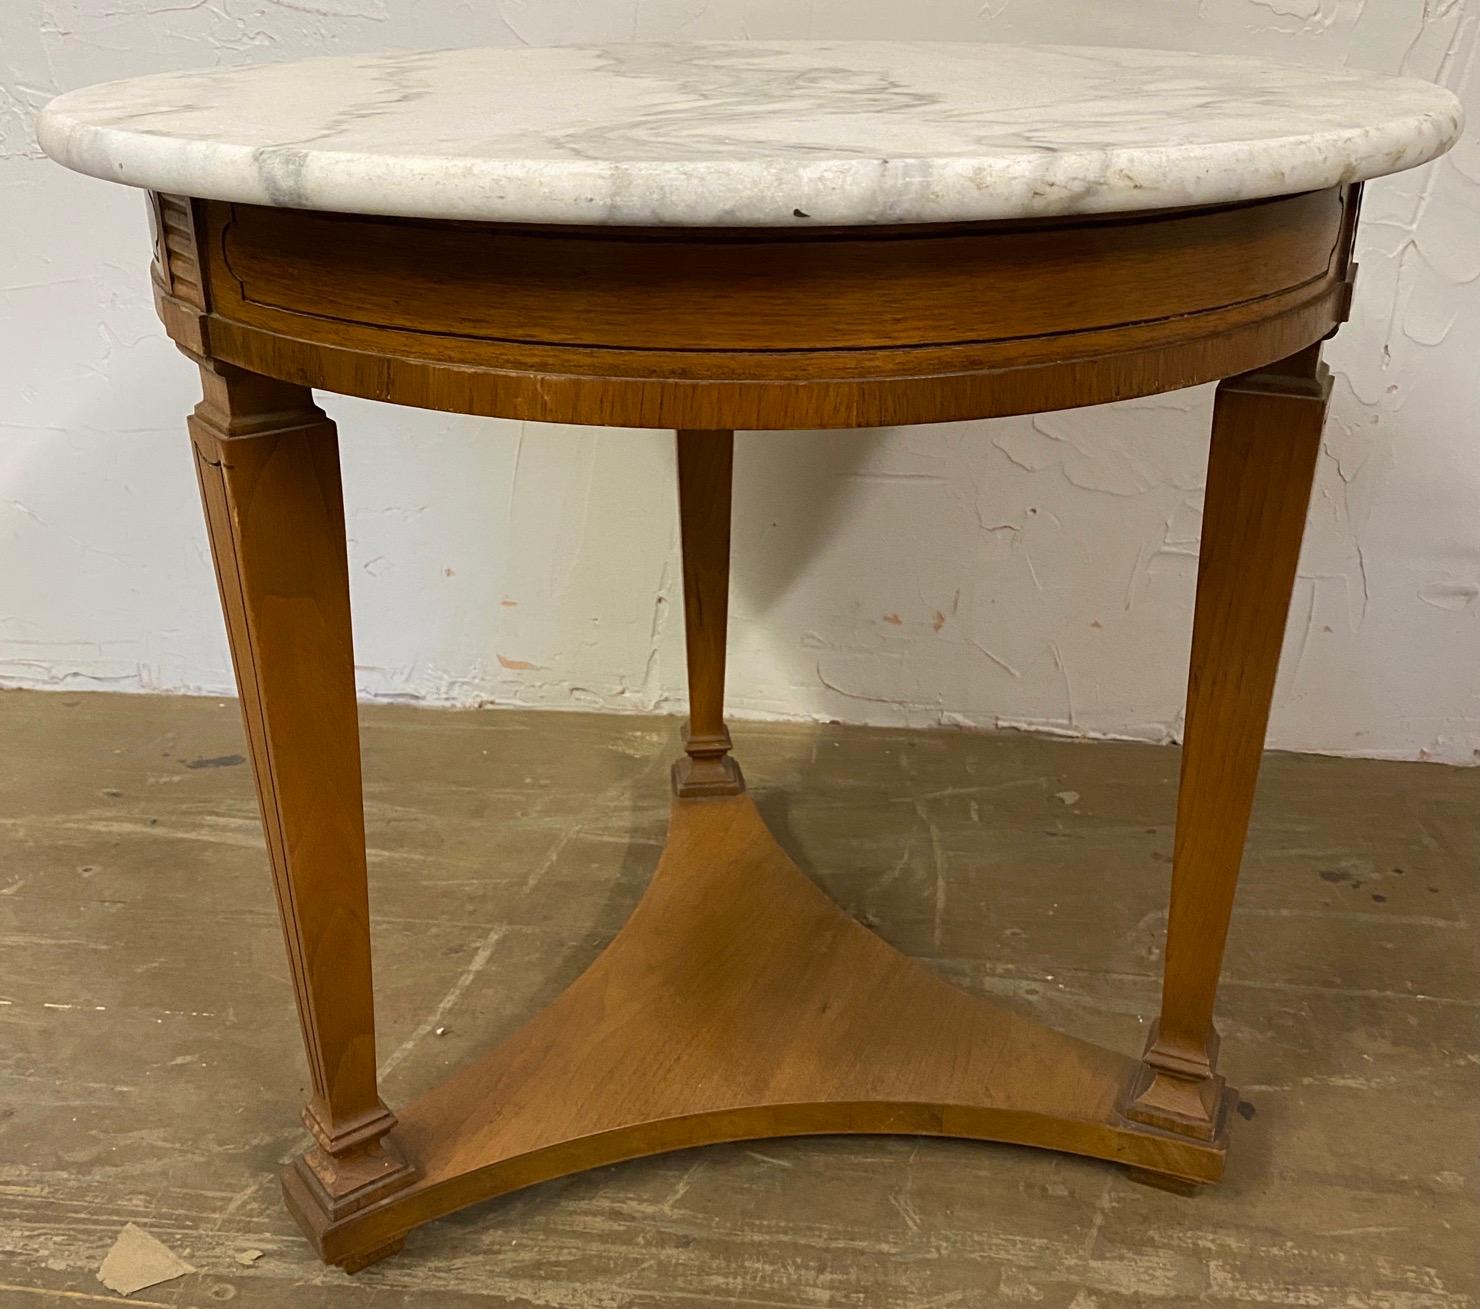 20th Century Regency Style Round Marble Top Table